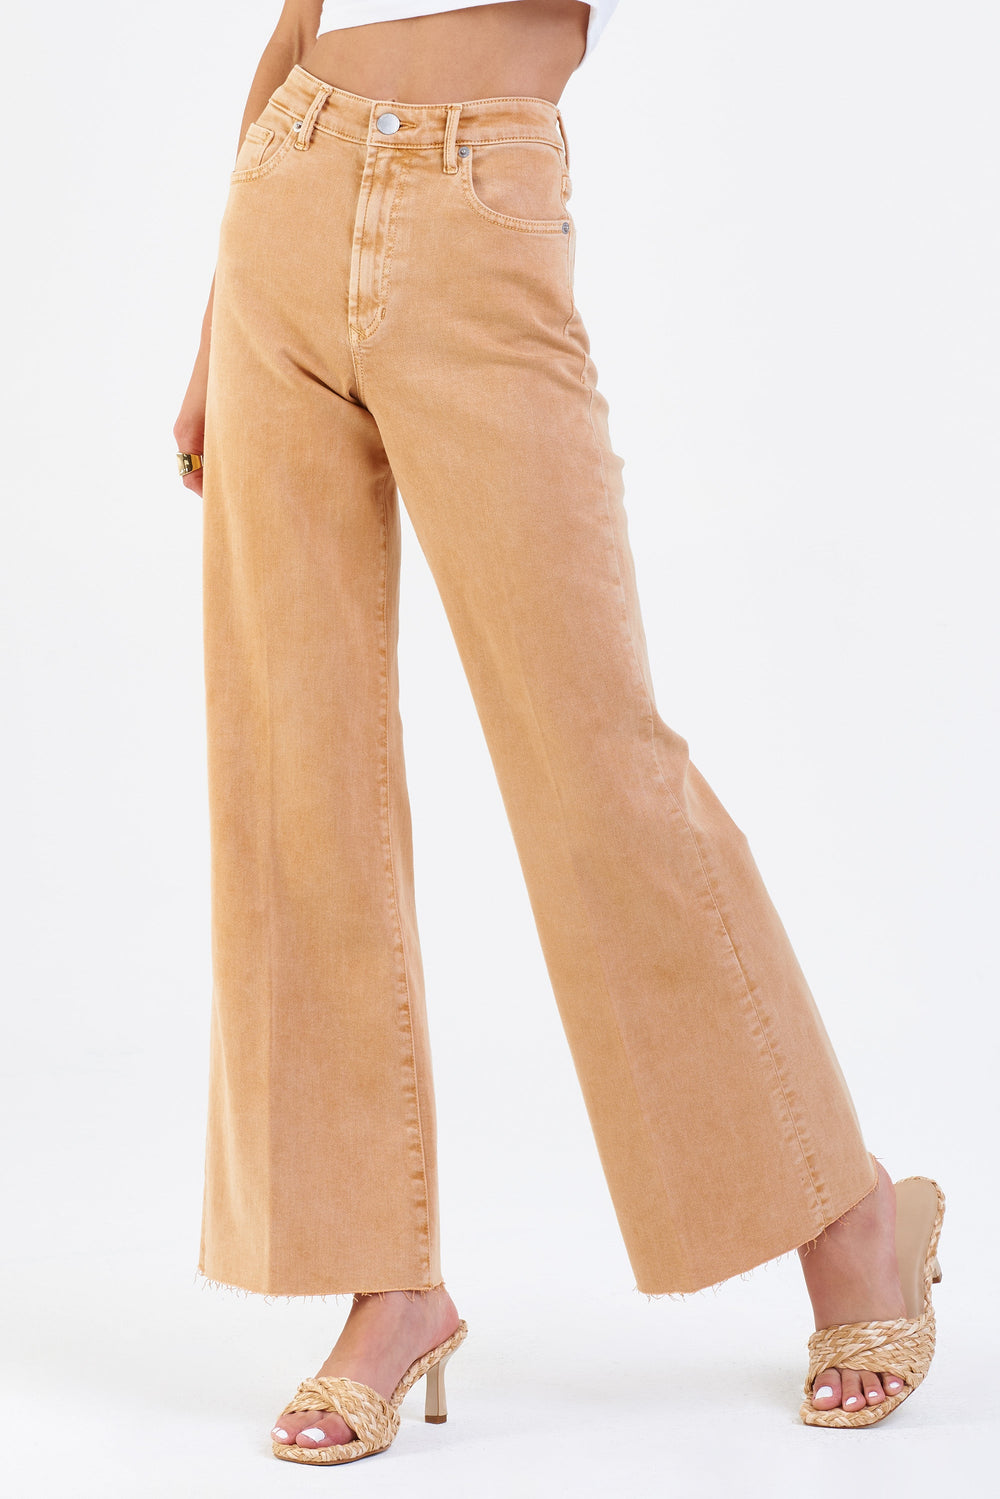 image of a female model wearing a FIONA SUPER HIGH RISE WIDE LEG JEANS SUNFLOWER JEANS